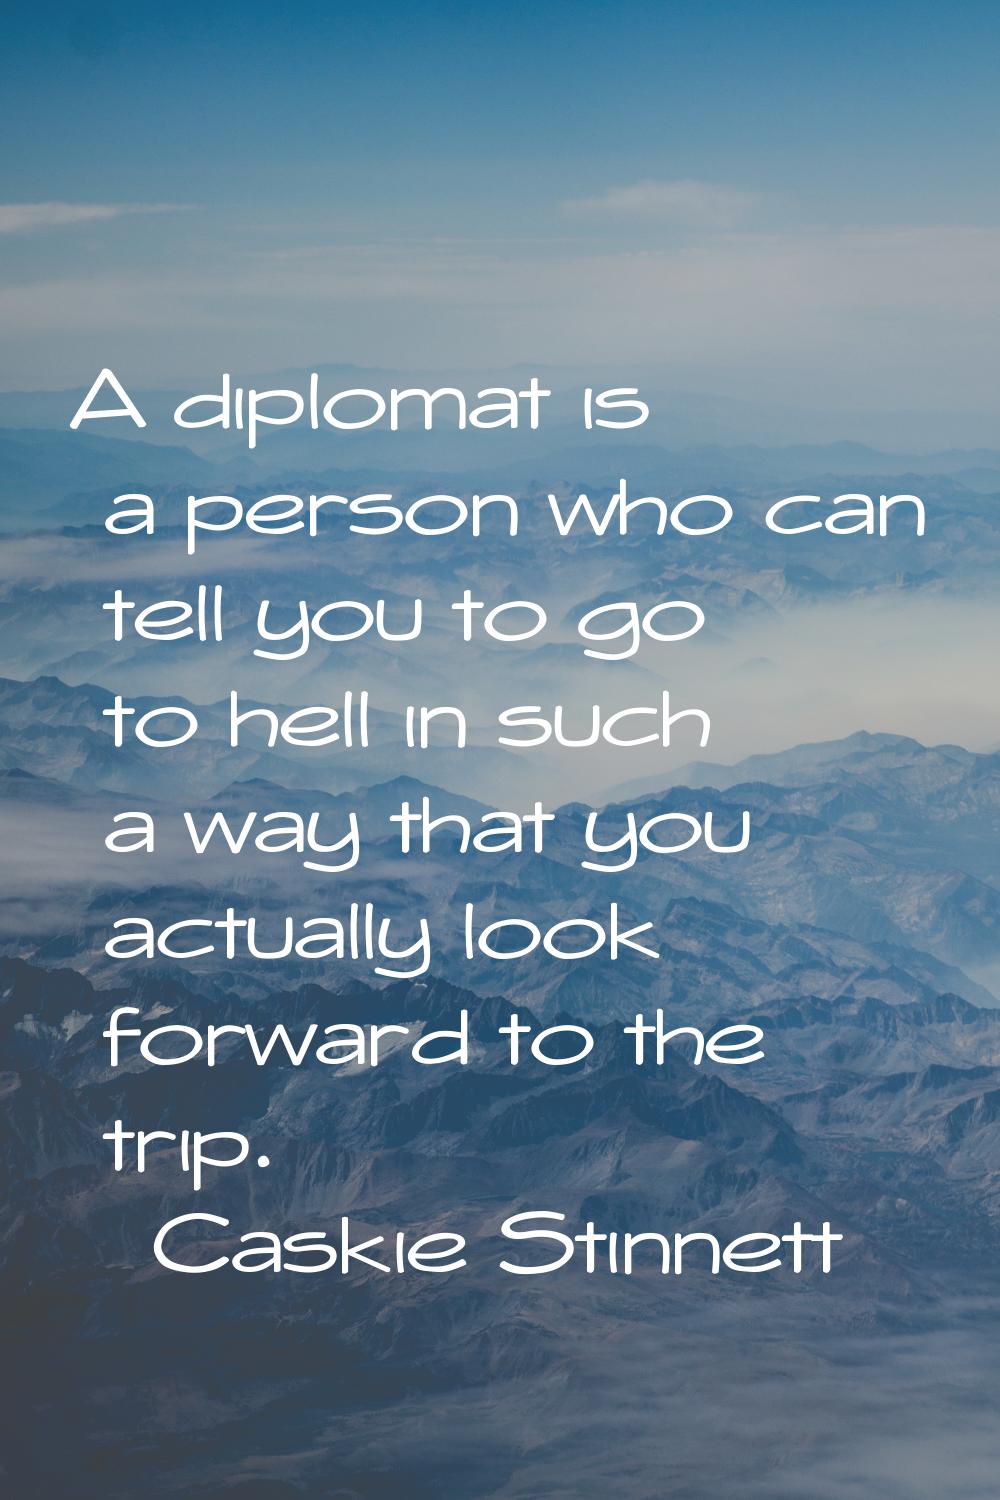 A diplomat is a person who can tell you to go to hell in such a way that you actually look forward 